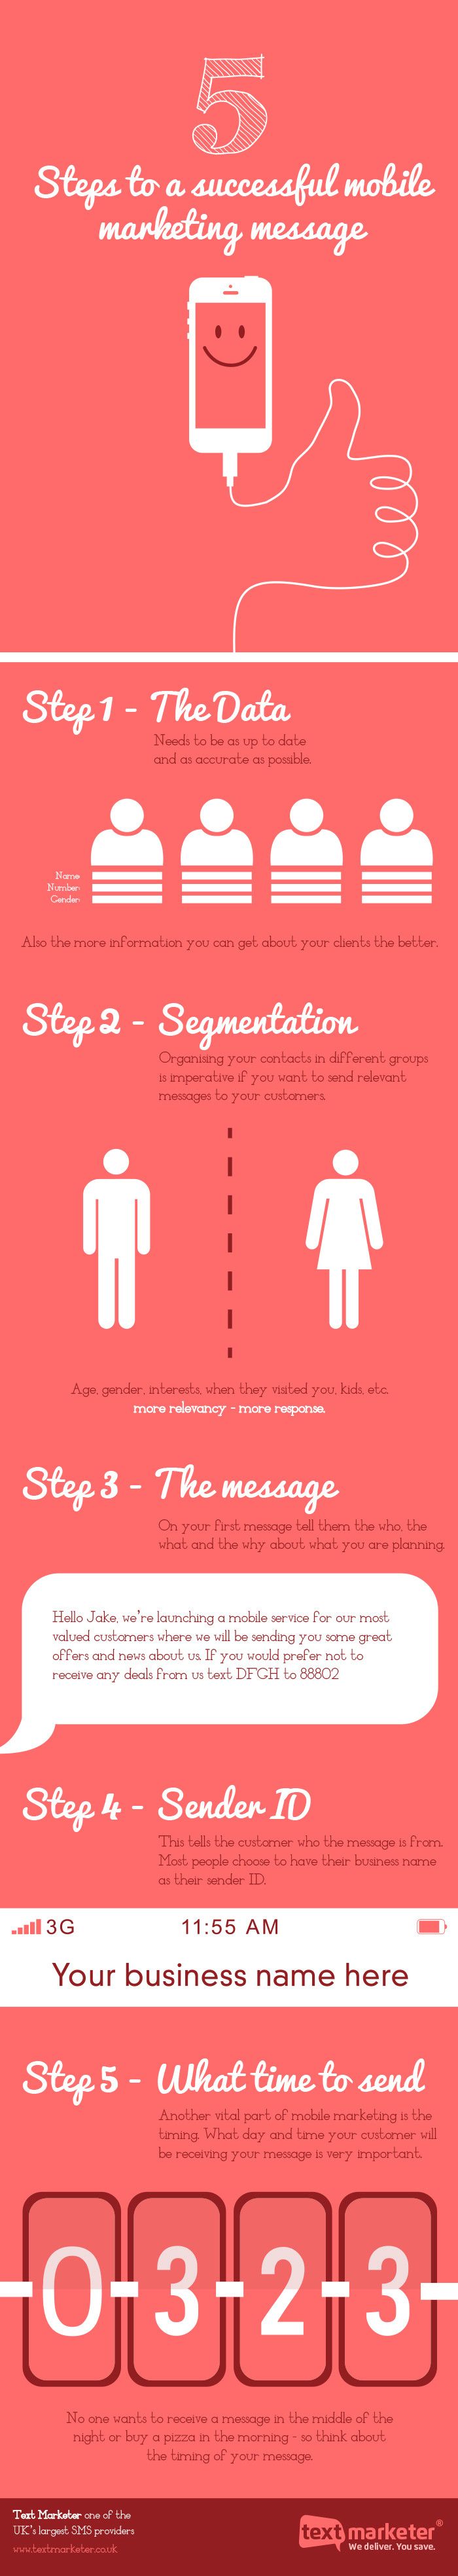 Digital-Marketing-5-Steps-to-a-Successful-Marketing-Message-infographic-Marketing-Mcommerce-Te Digital Marketing : 5 Steps to a Successful Marketing Message #infographic #Marketing #Mcommerce #Te...